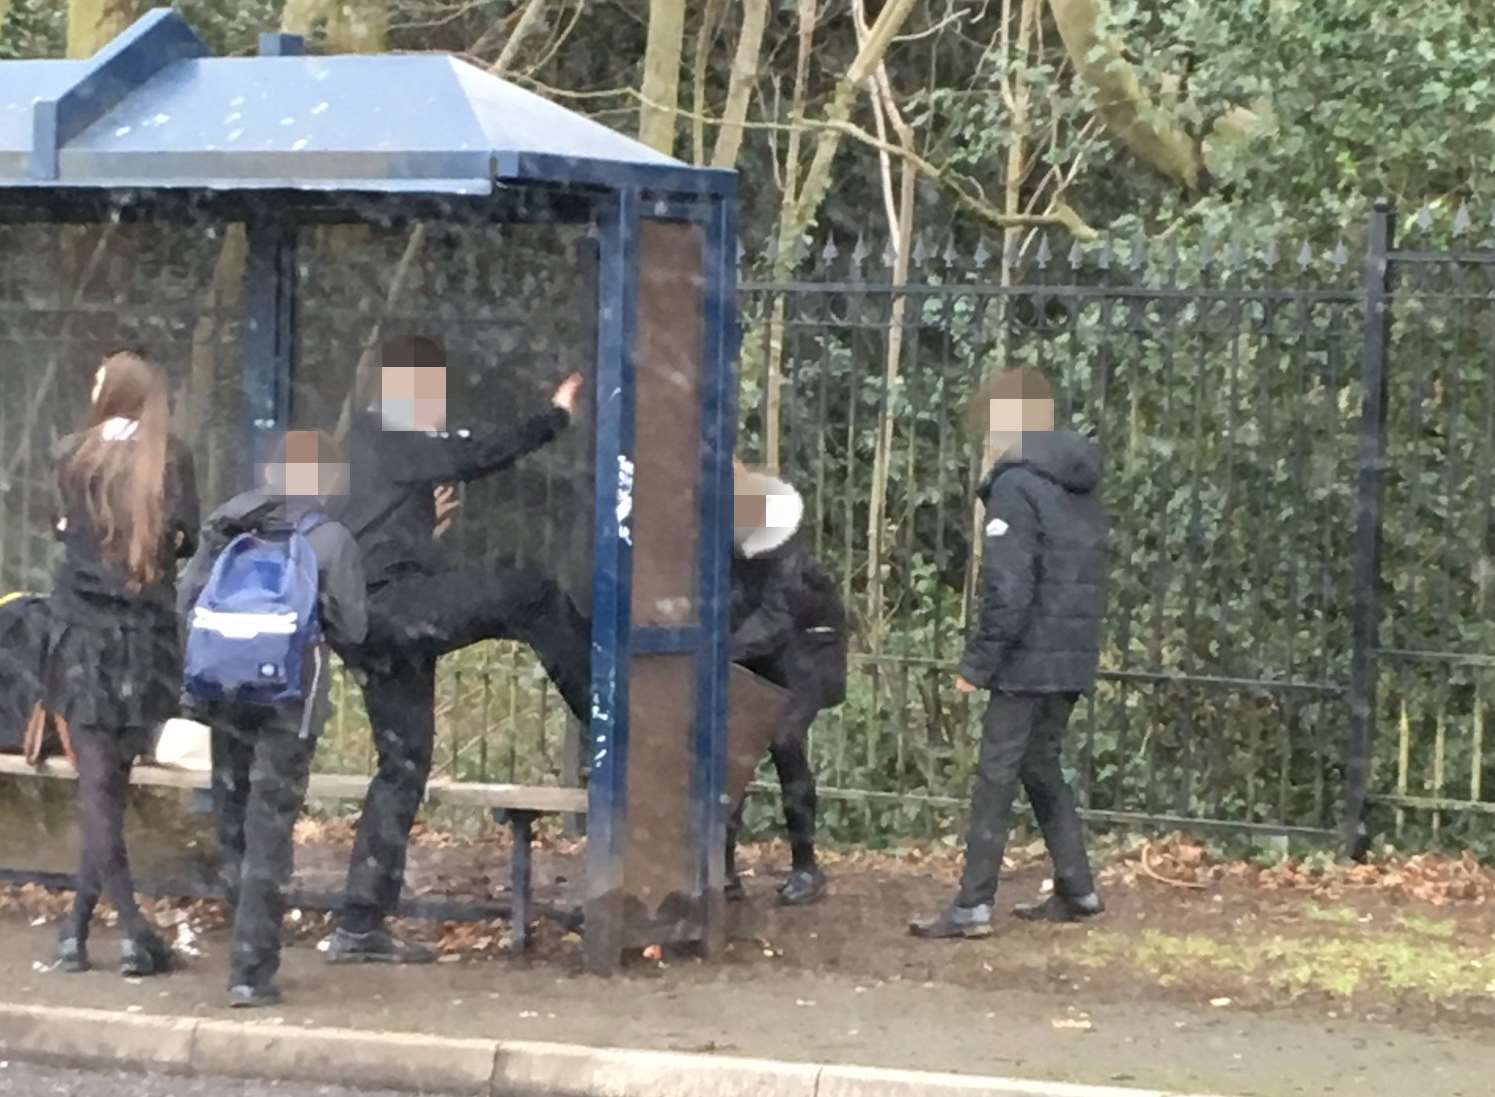 Cornwallis Academy has apologised after some of its student were caught vandalising a public bus shelter.